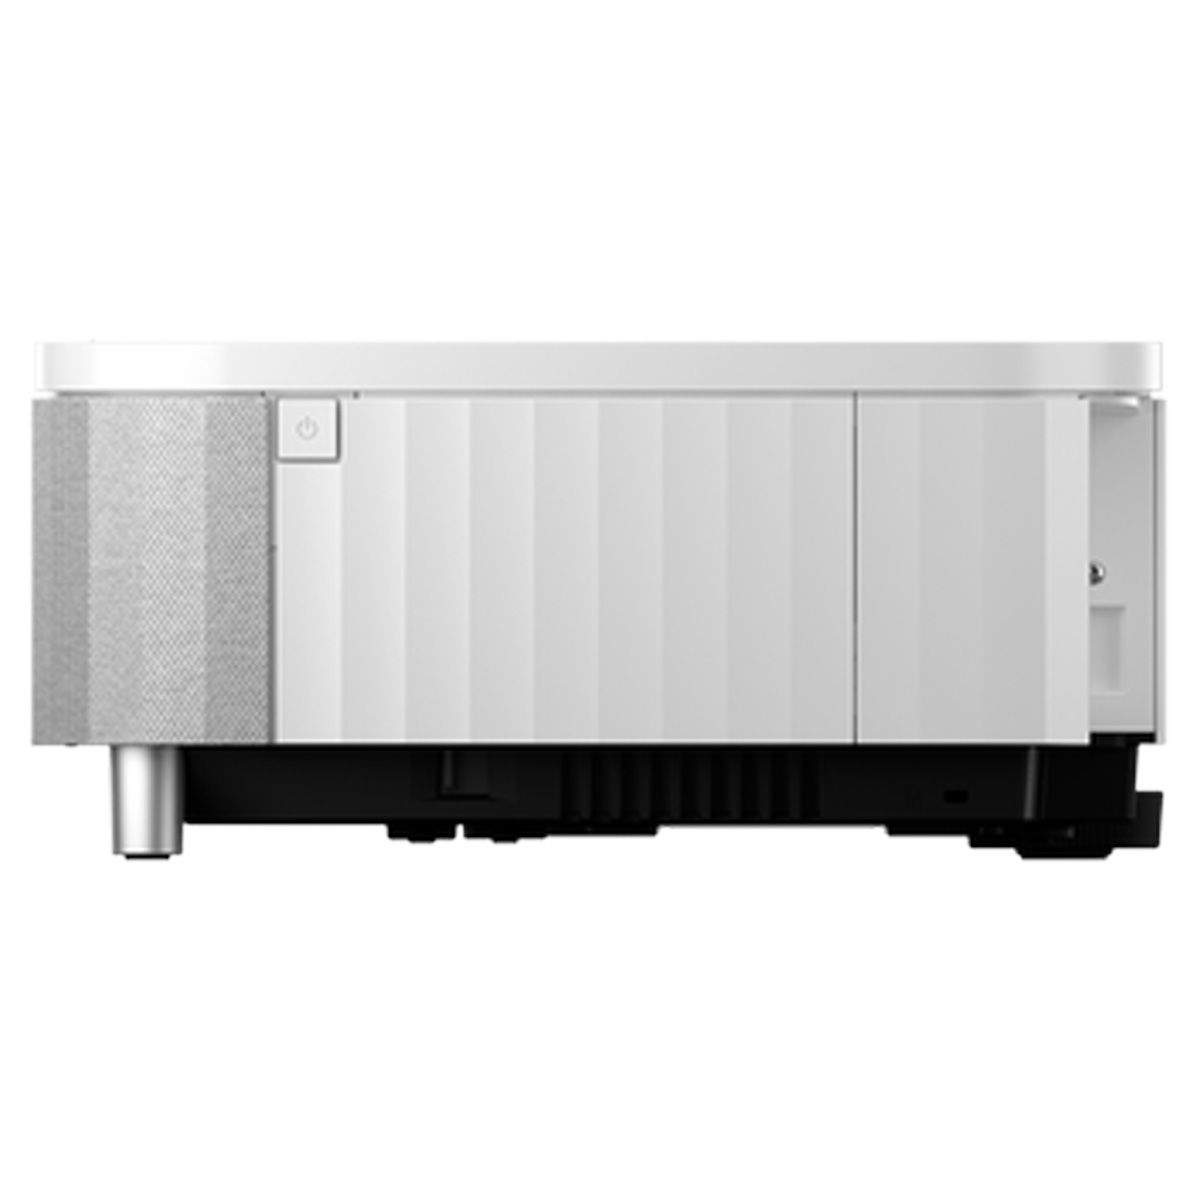 Epson LS800 UST Projector - White - side view with power button